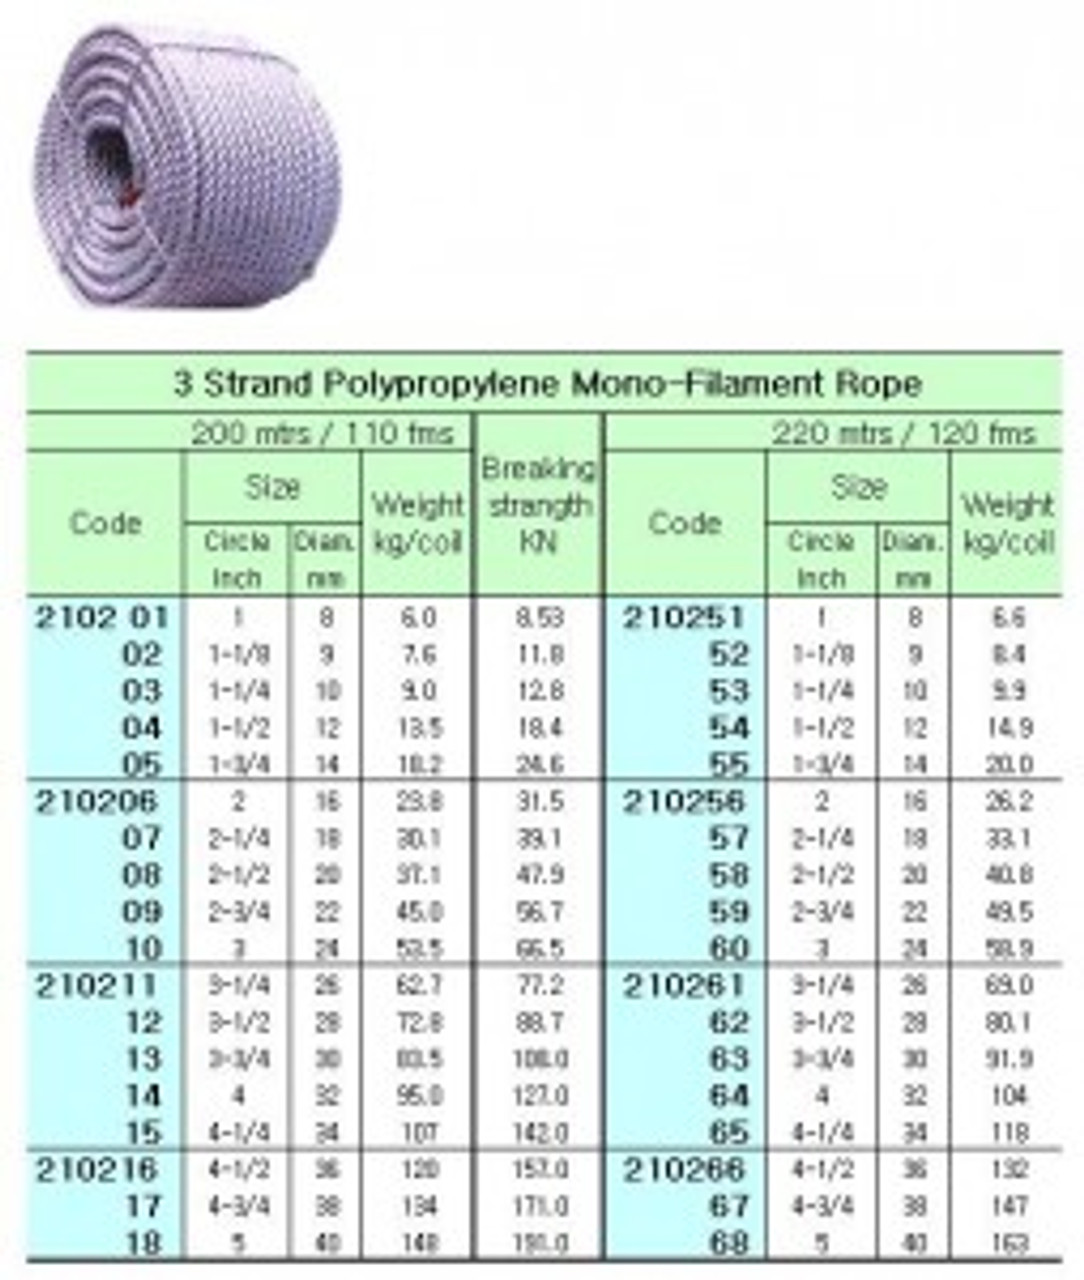 IMPA 210263 POLYPROPYLENE ROPE 30mm 3-strand coil of 220 mtr.